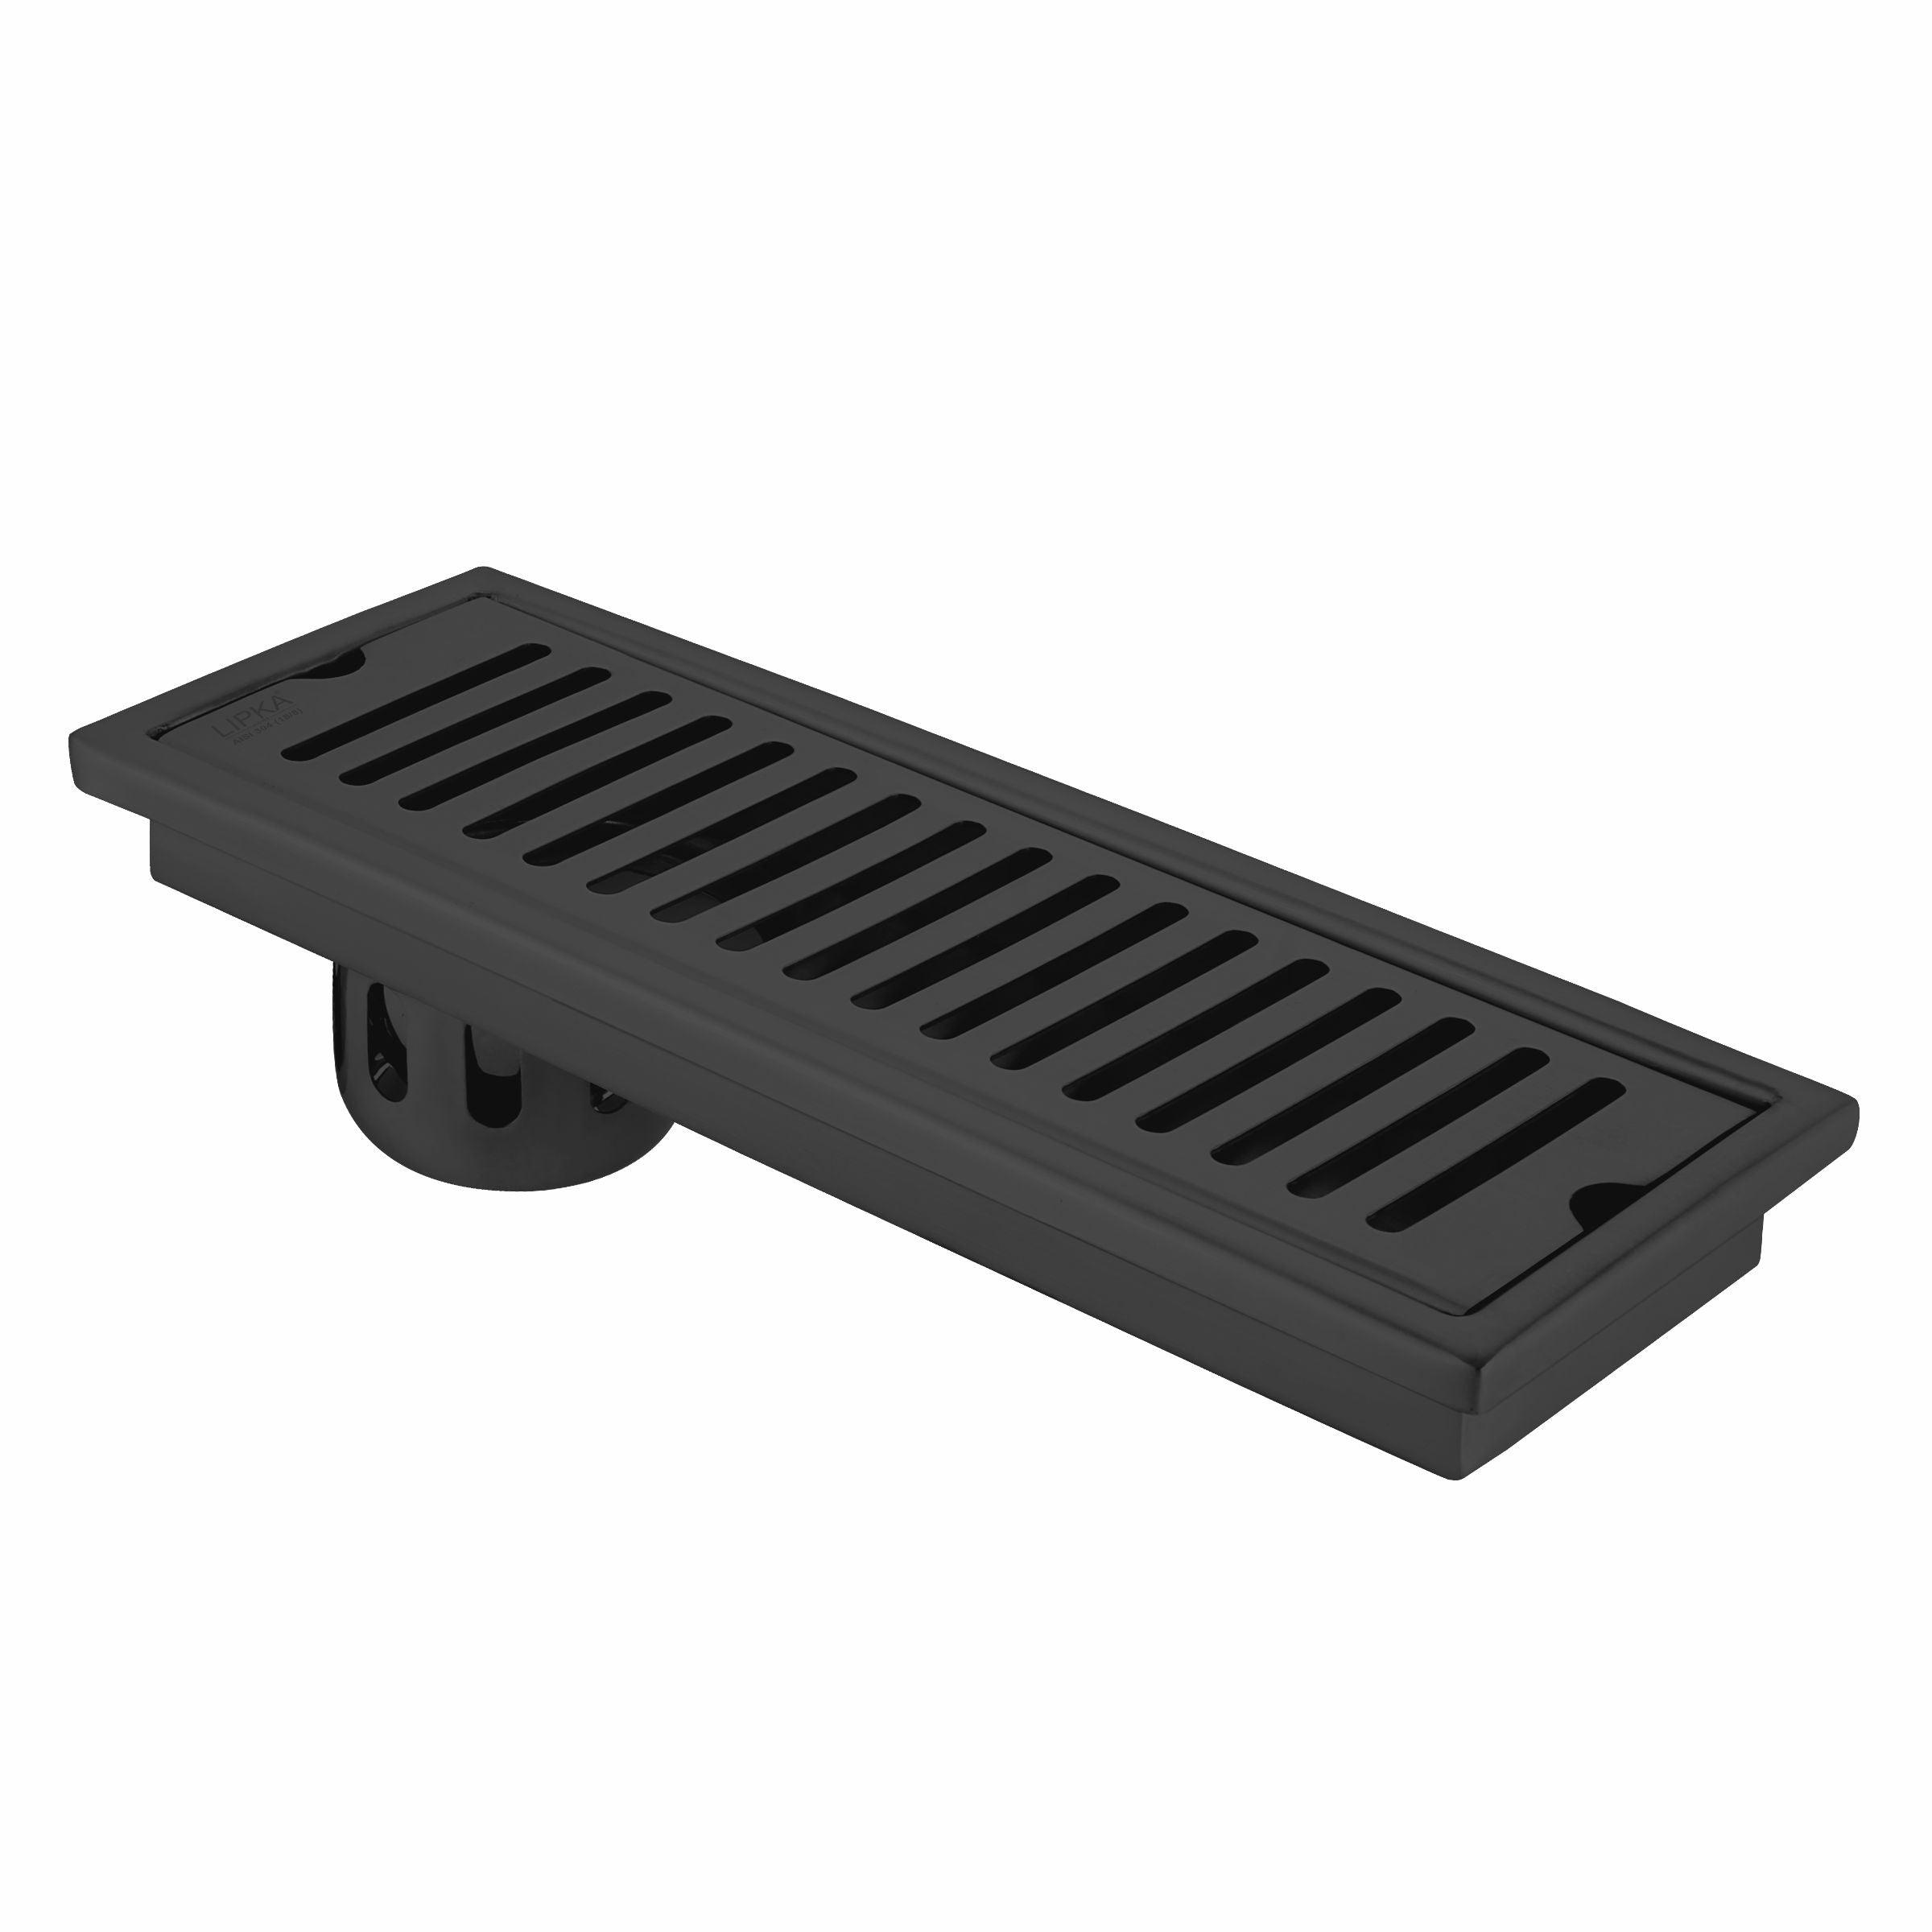 Vertical Shower Drain Channel - Black (18 x 4 Inches)\